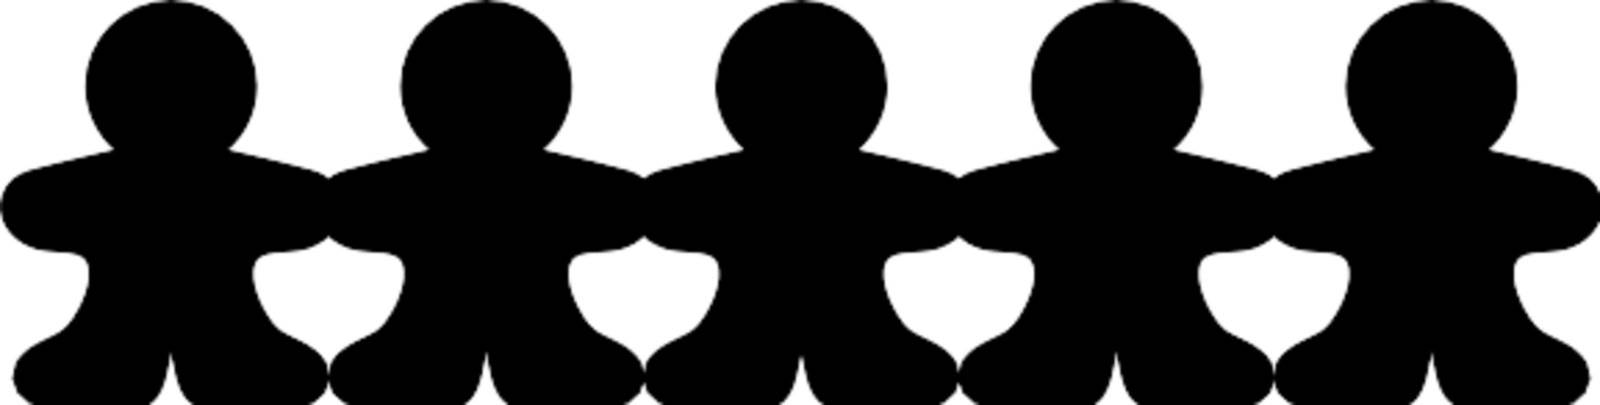 human body shape figure in vector file, very easy to edit, applicable to several concepts